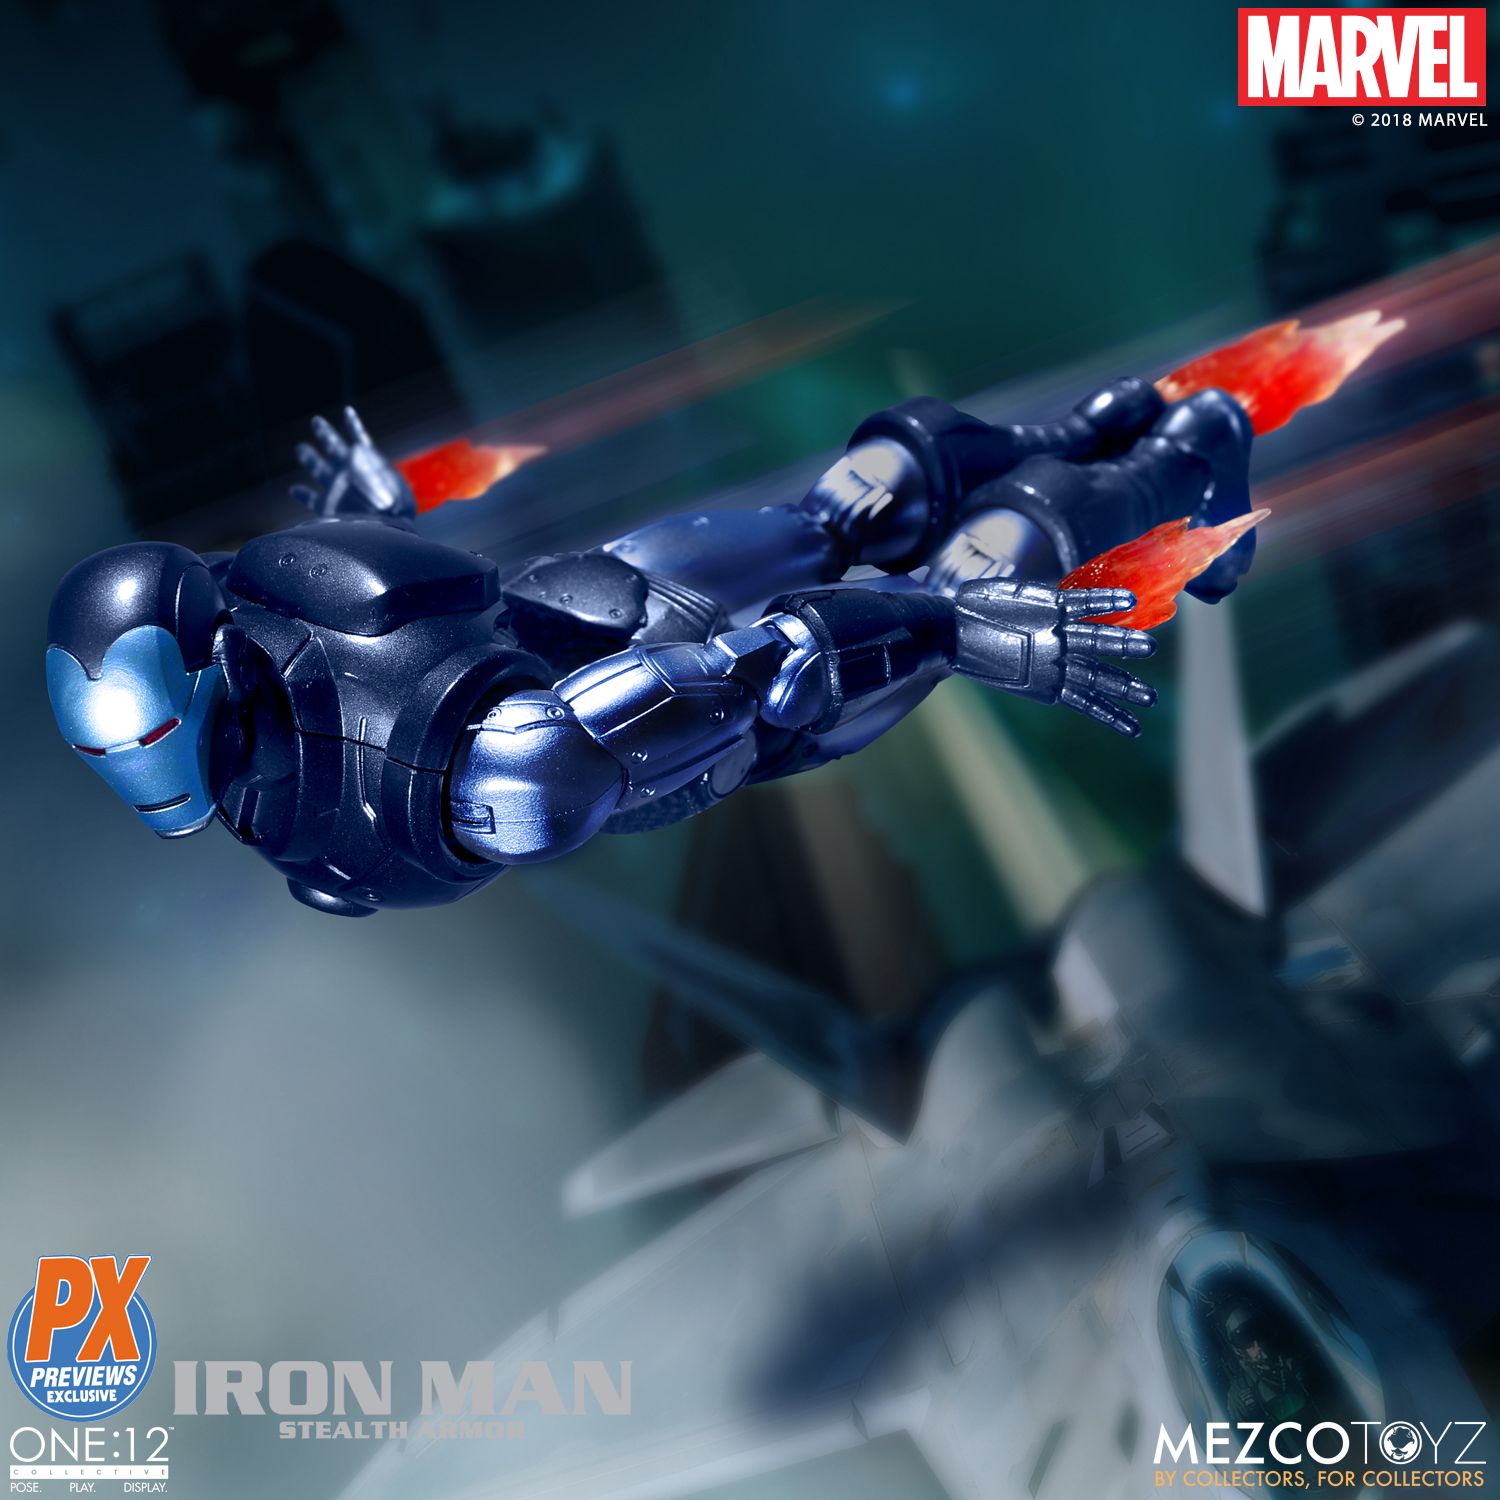 Previews Exclusive: One:12 Stealth Armor Iron Man